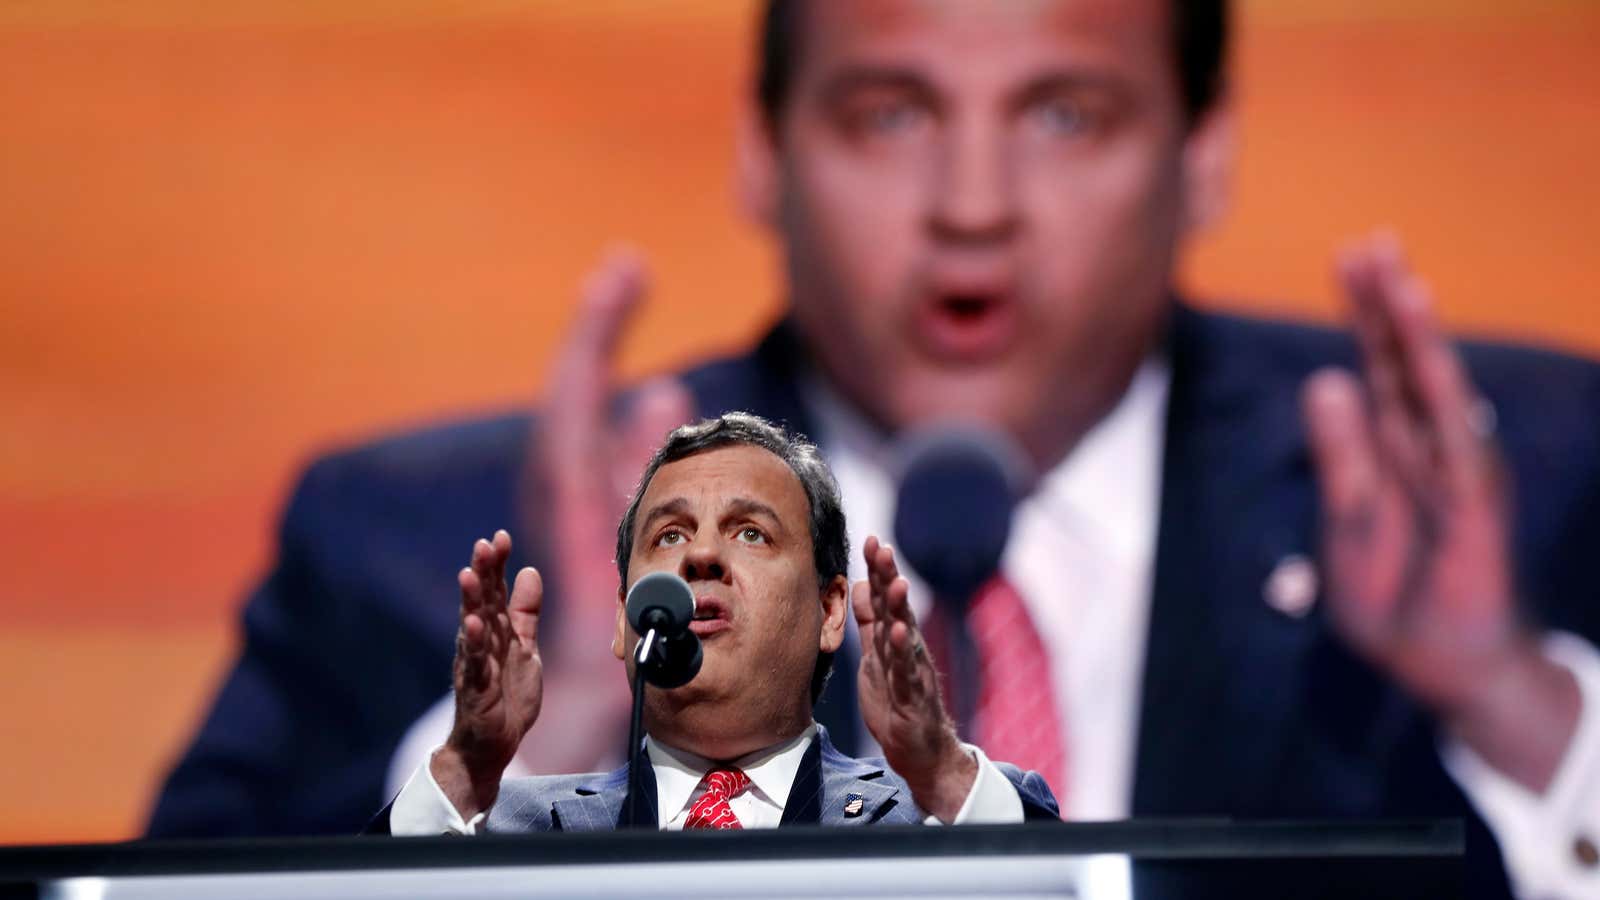 New Jersey governor Chris Christie “prosecutes” Hillary Clinton, in absentia, for crimes against the world.